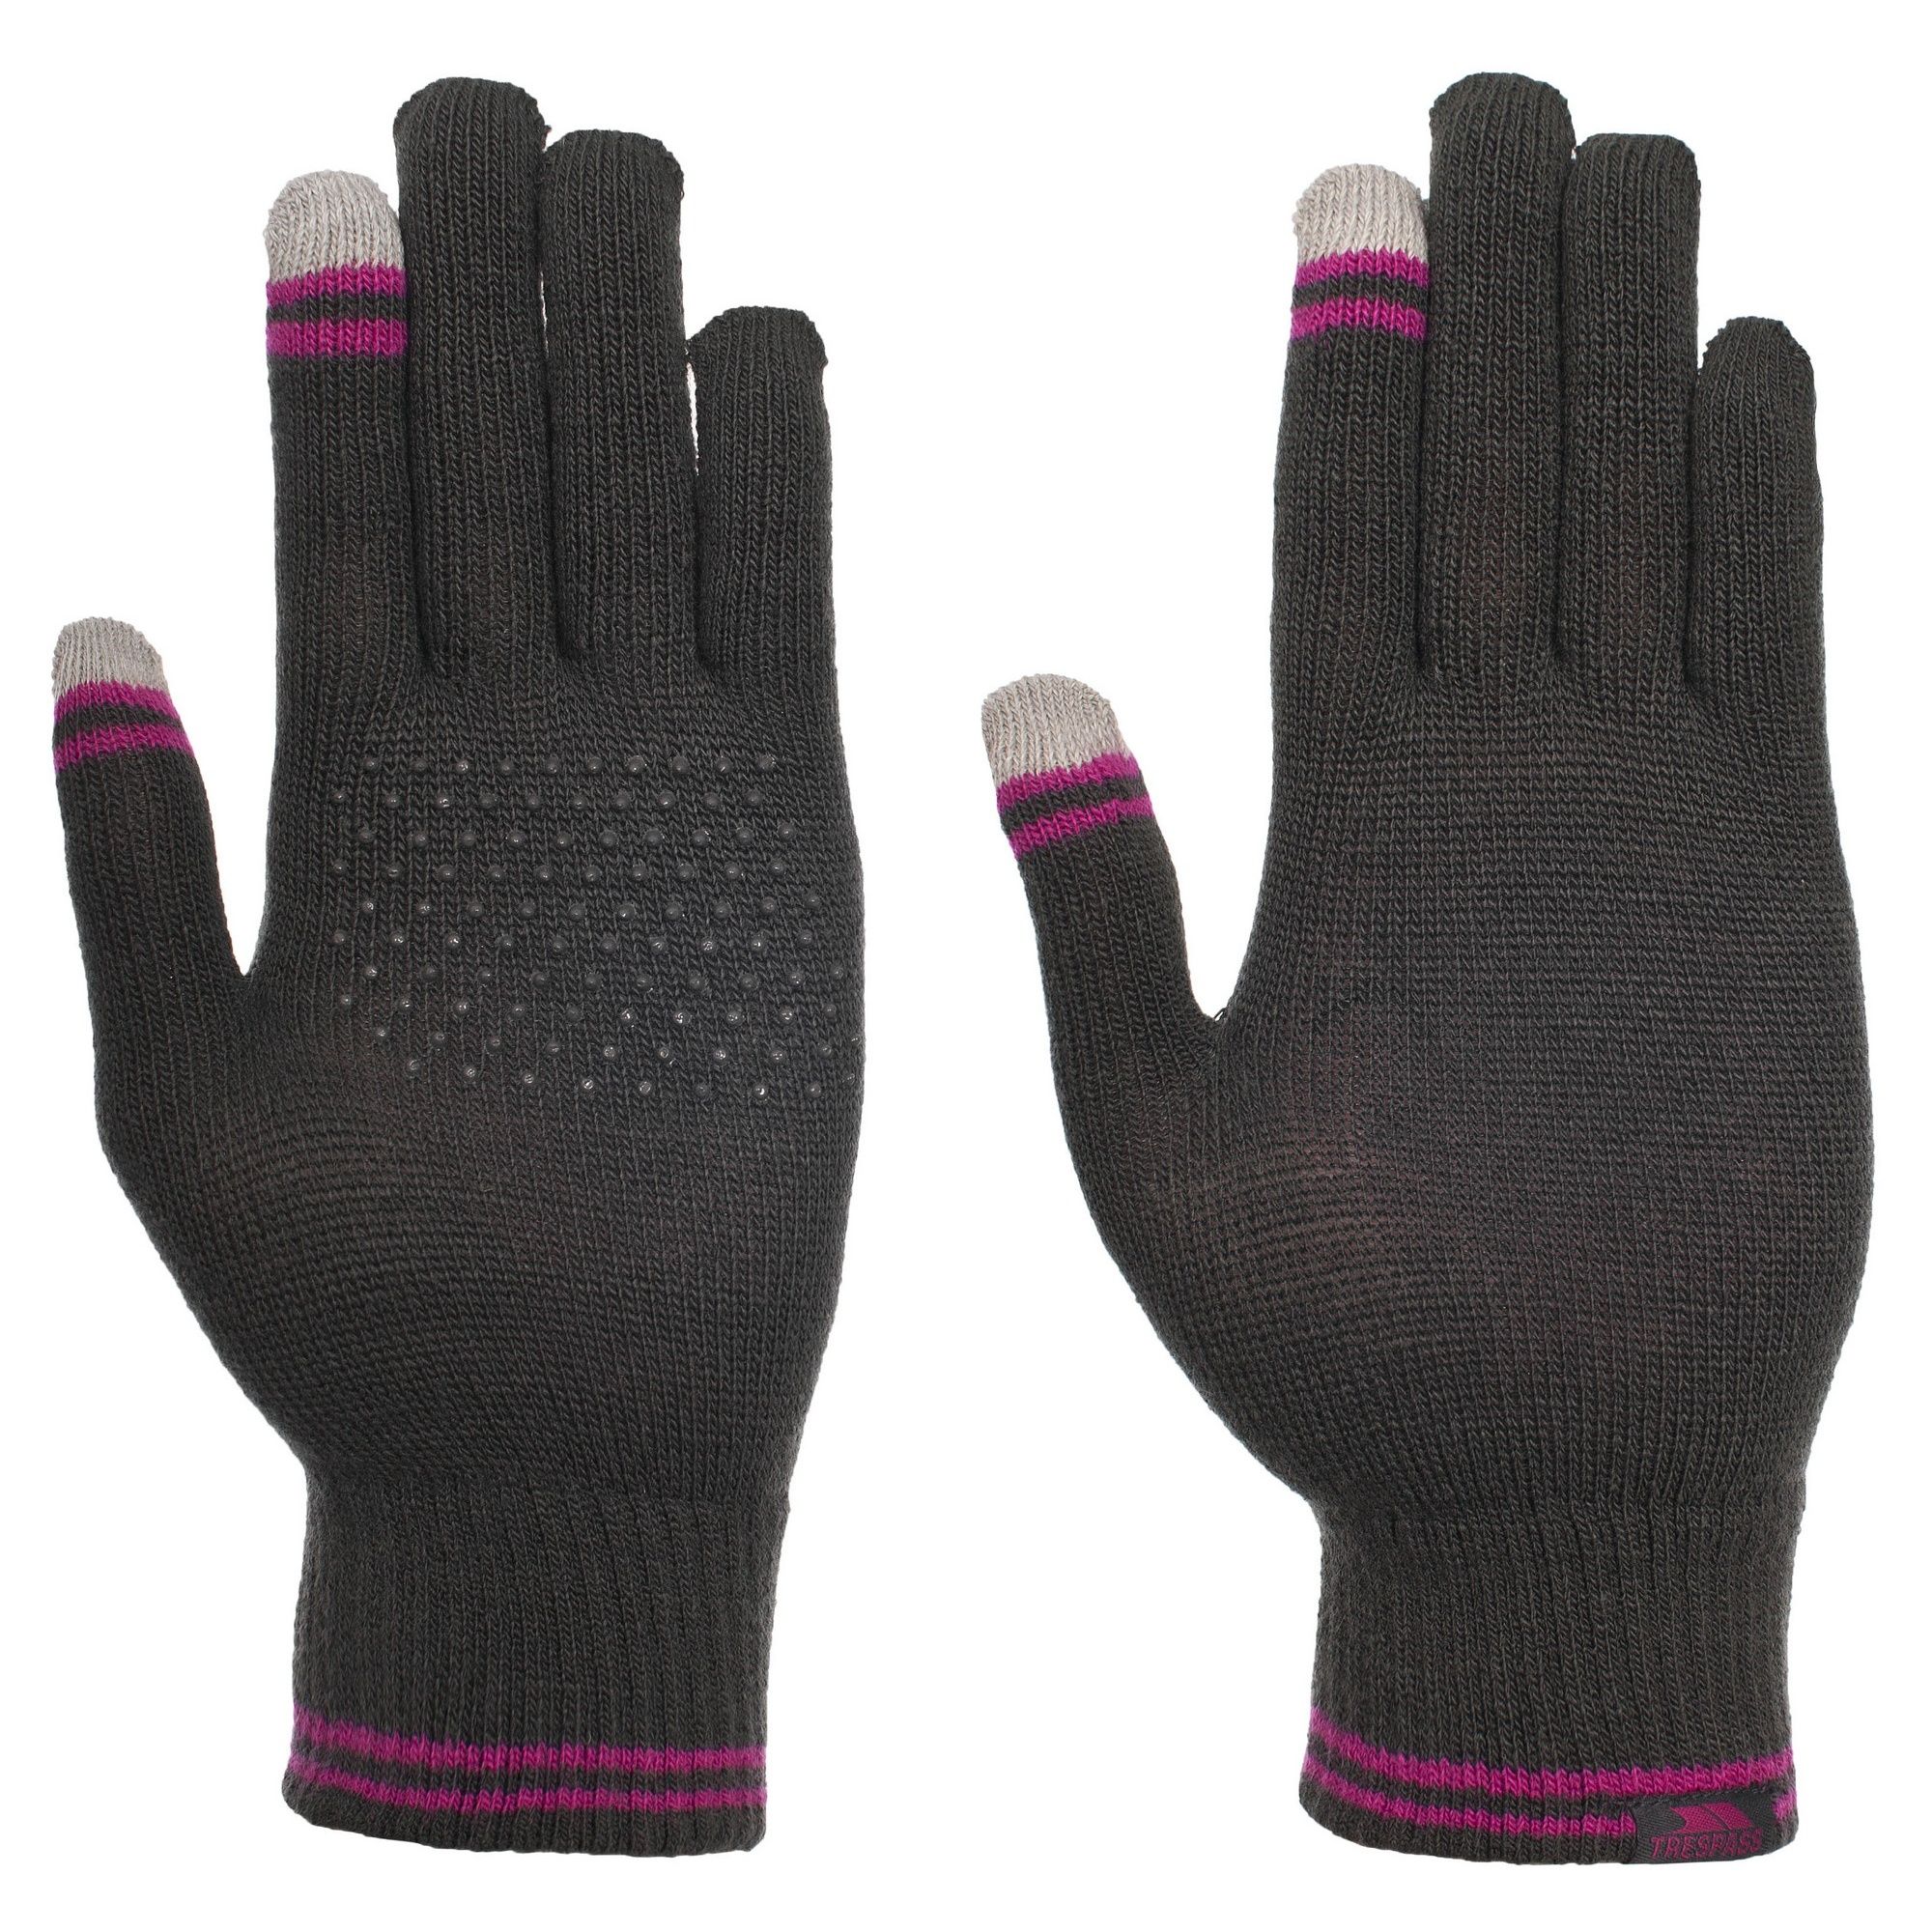 Knitted glove. Touch screen compatible. Palm grips. Ribbed cuff. Contrast striped detail. 100% Acrylic.